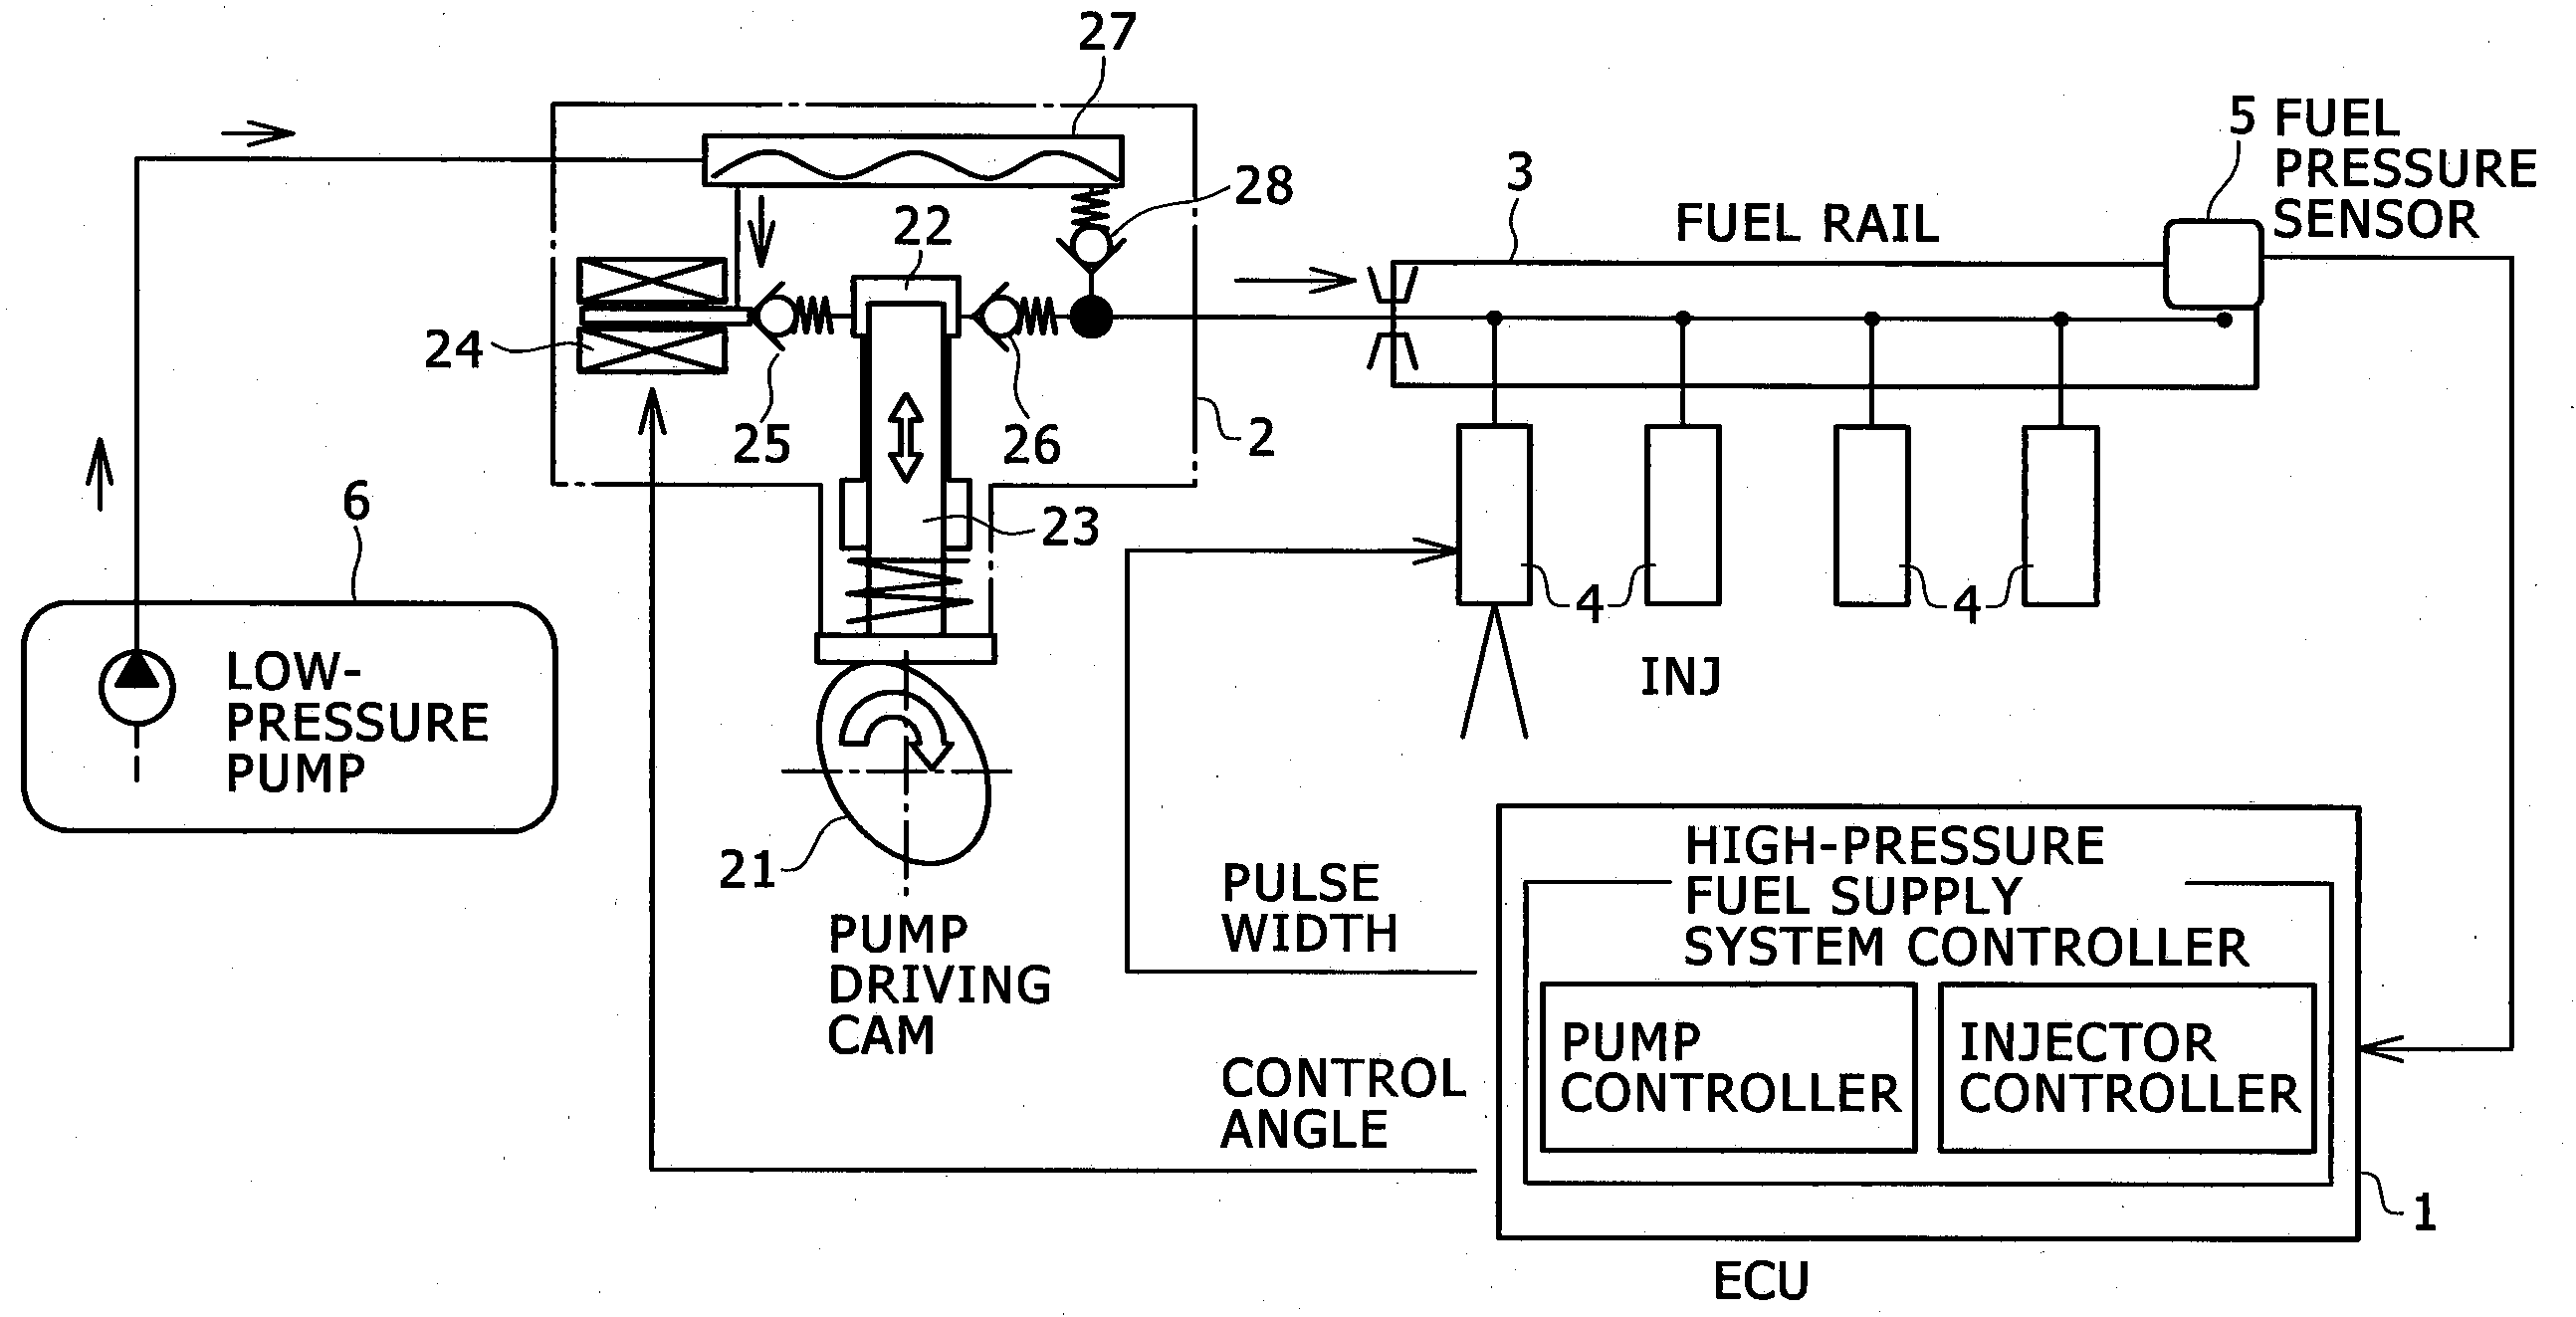 Diagnostic apparatus for high-pressure fuel supply system